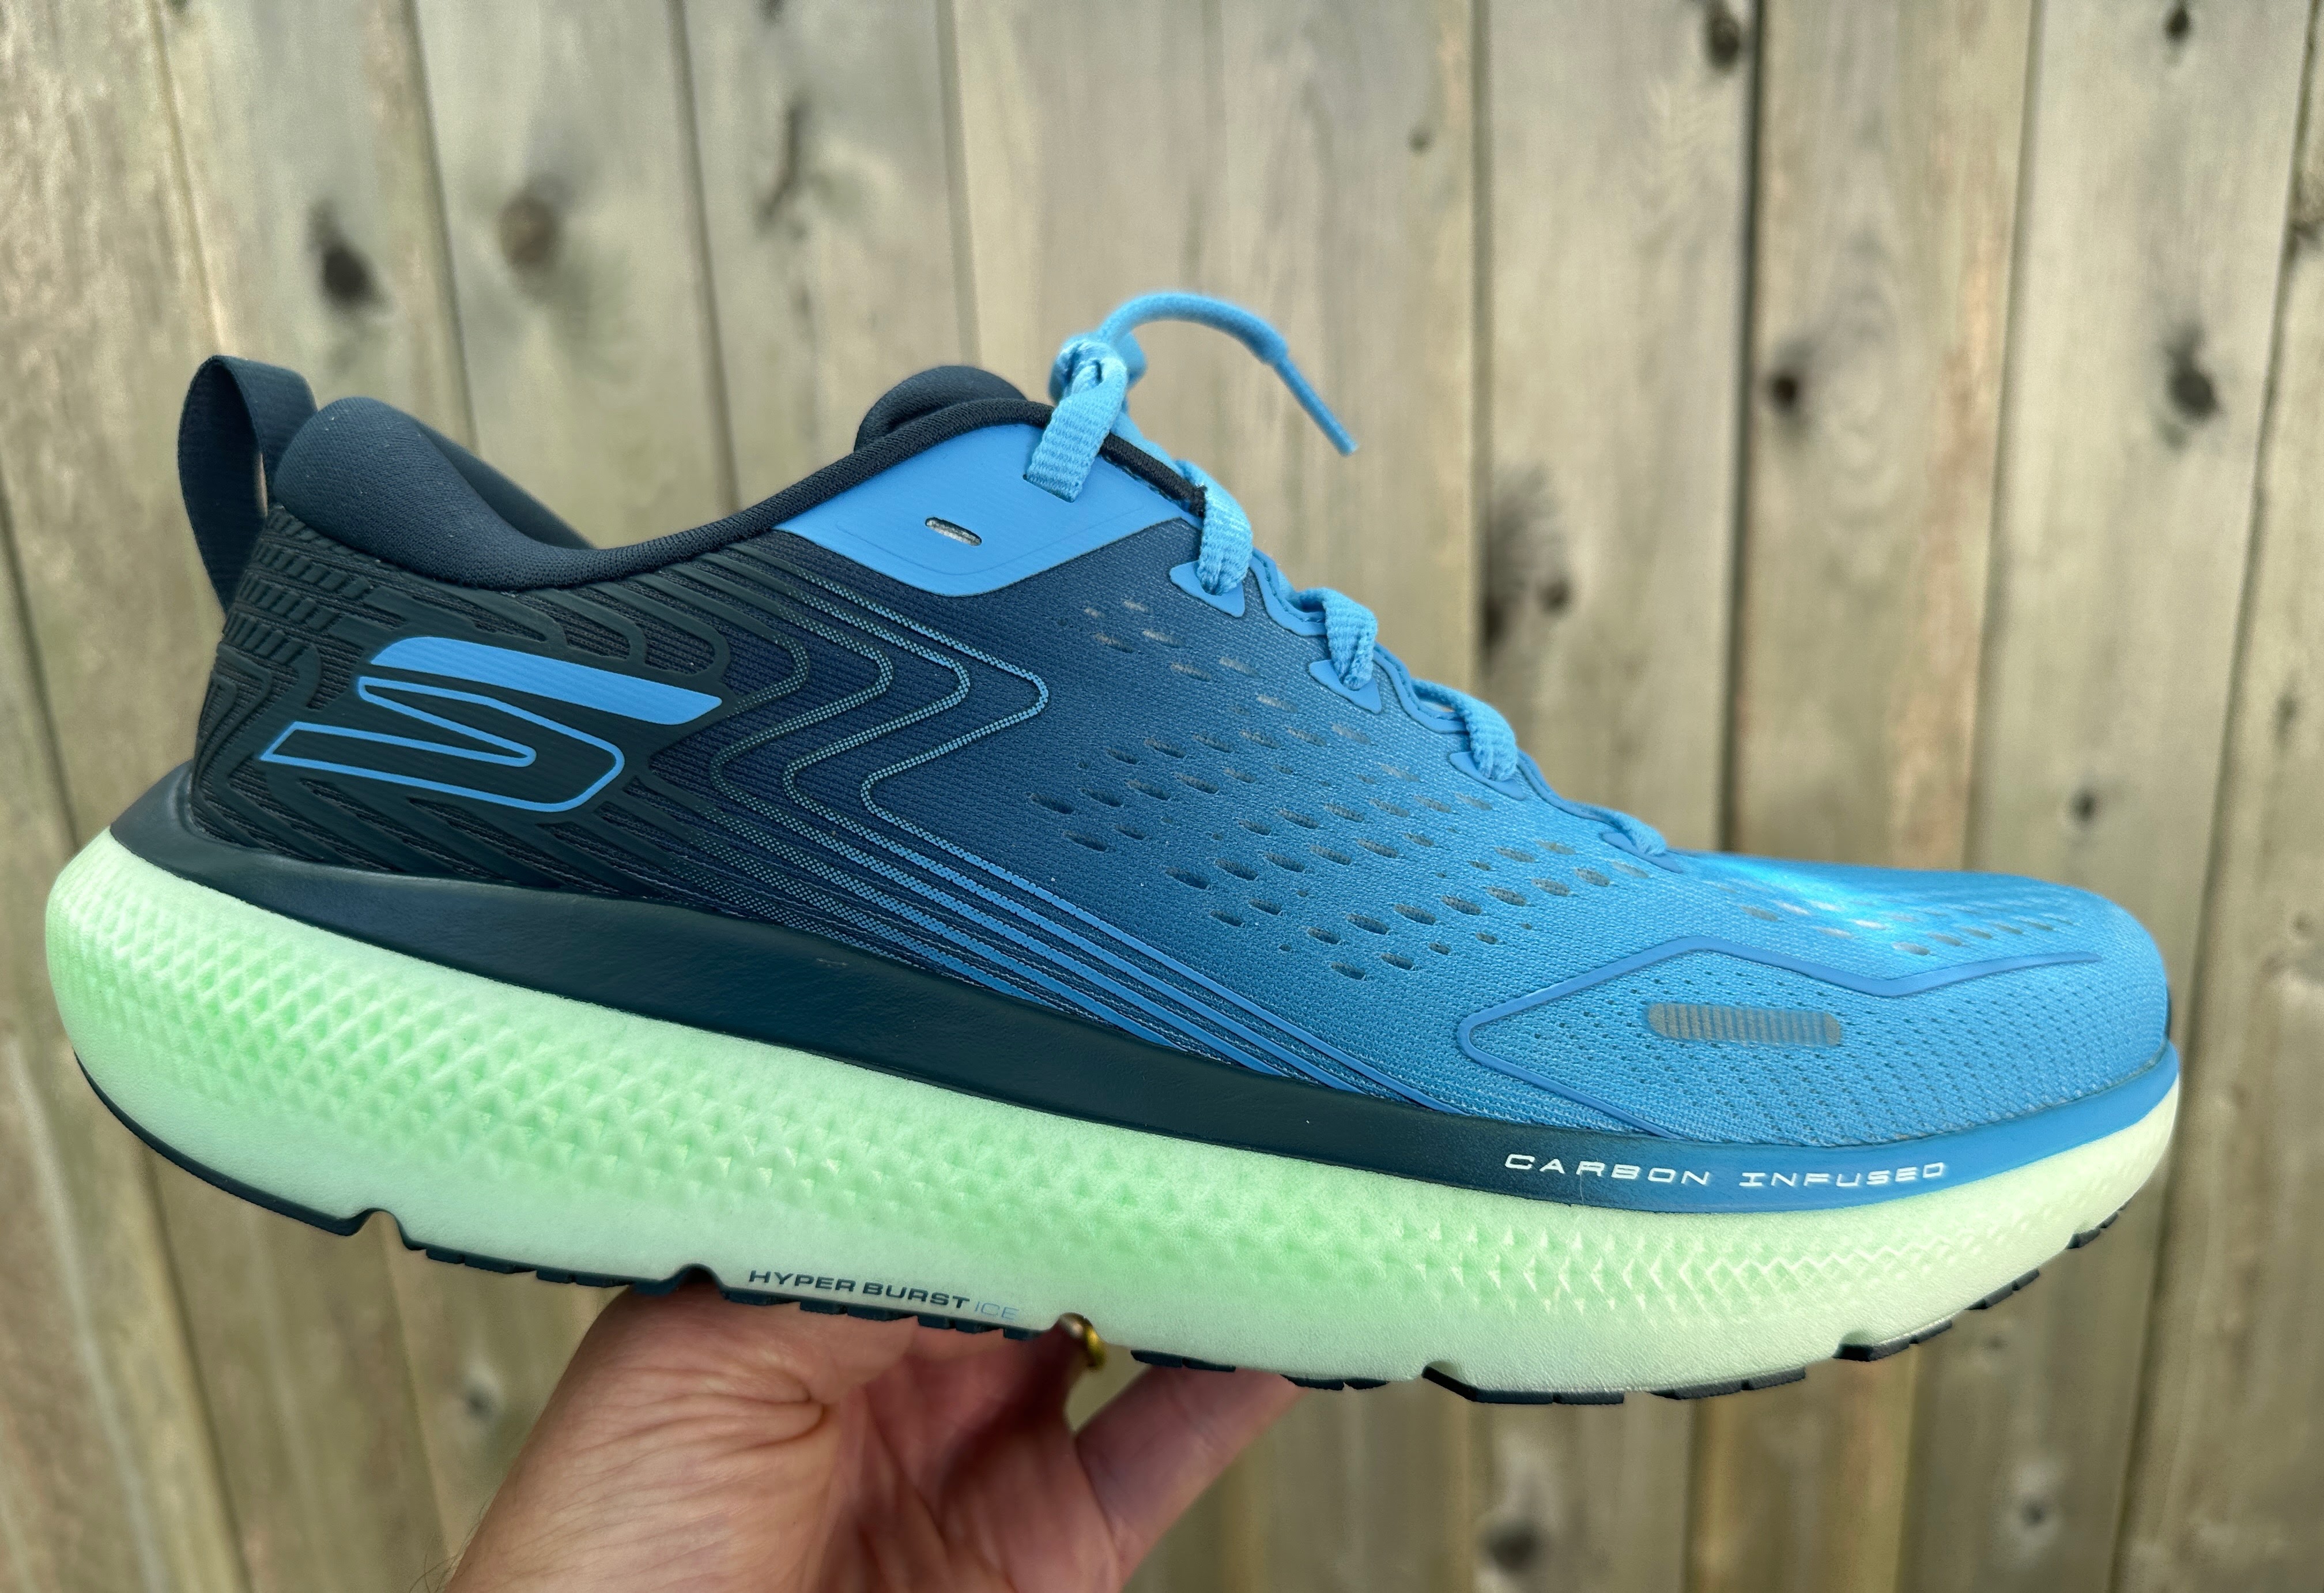 Road Trail Run: Skechers GO Run Ride 11 Initial Review: Foam, More Cushion, Carbon Infused Plate 6 Comparisons